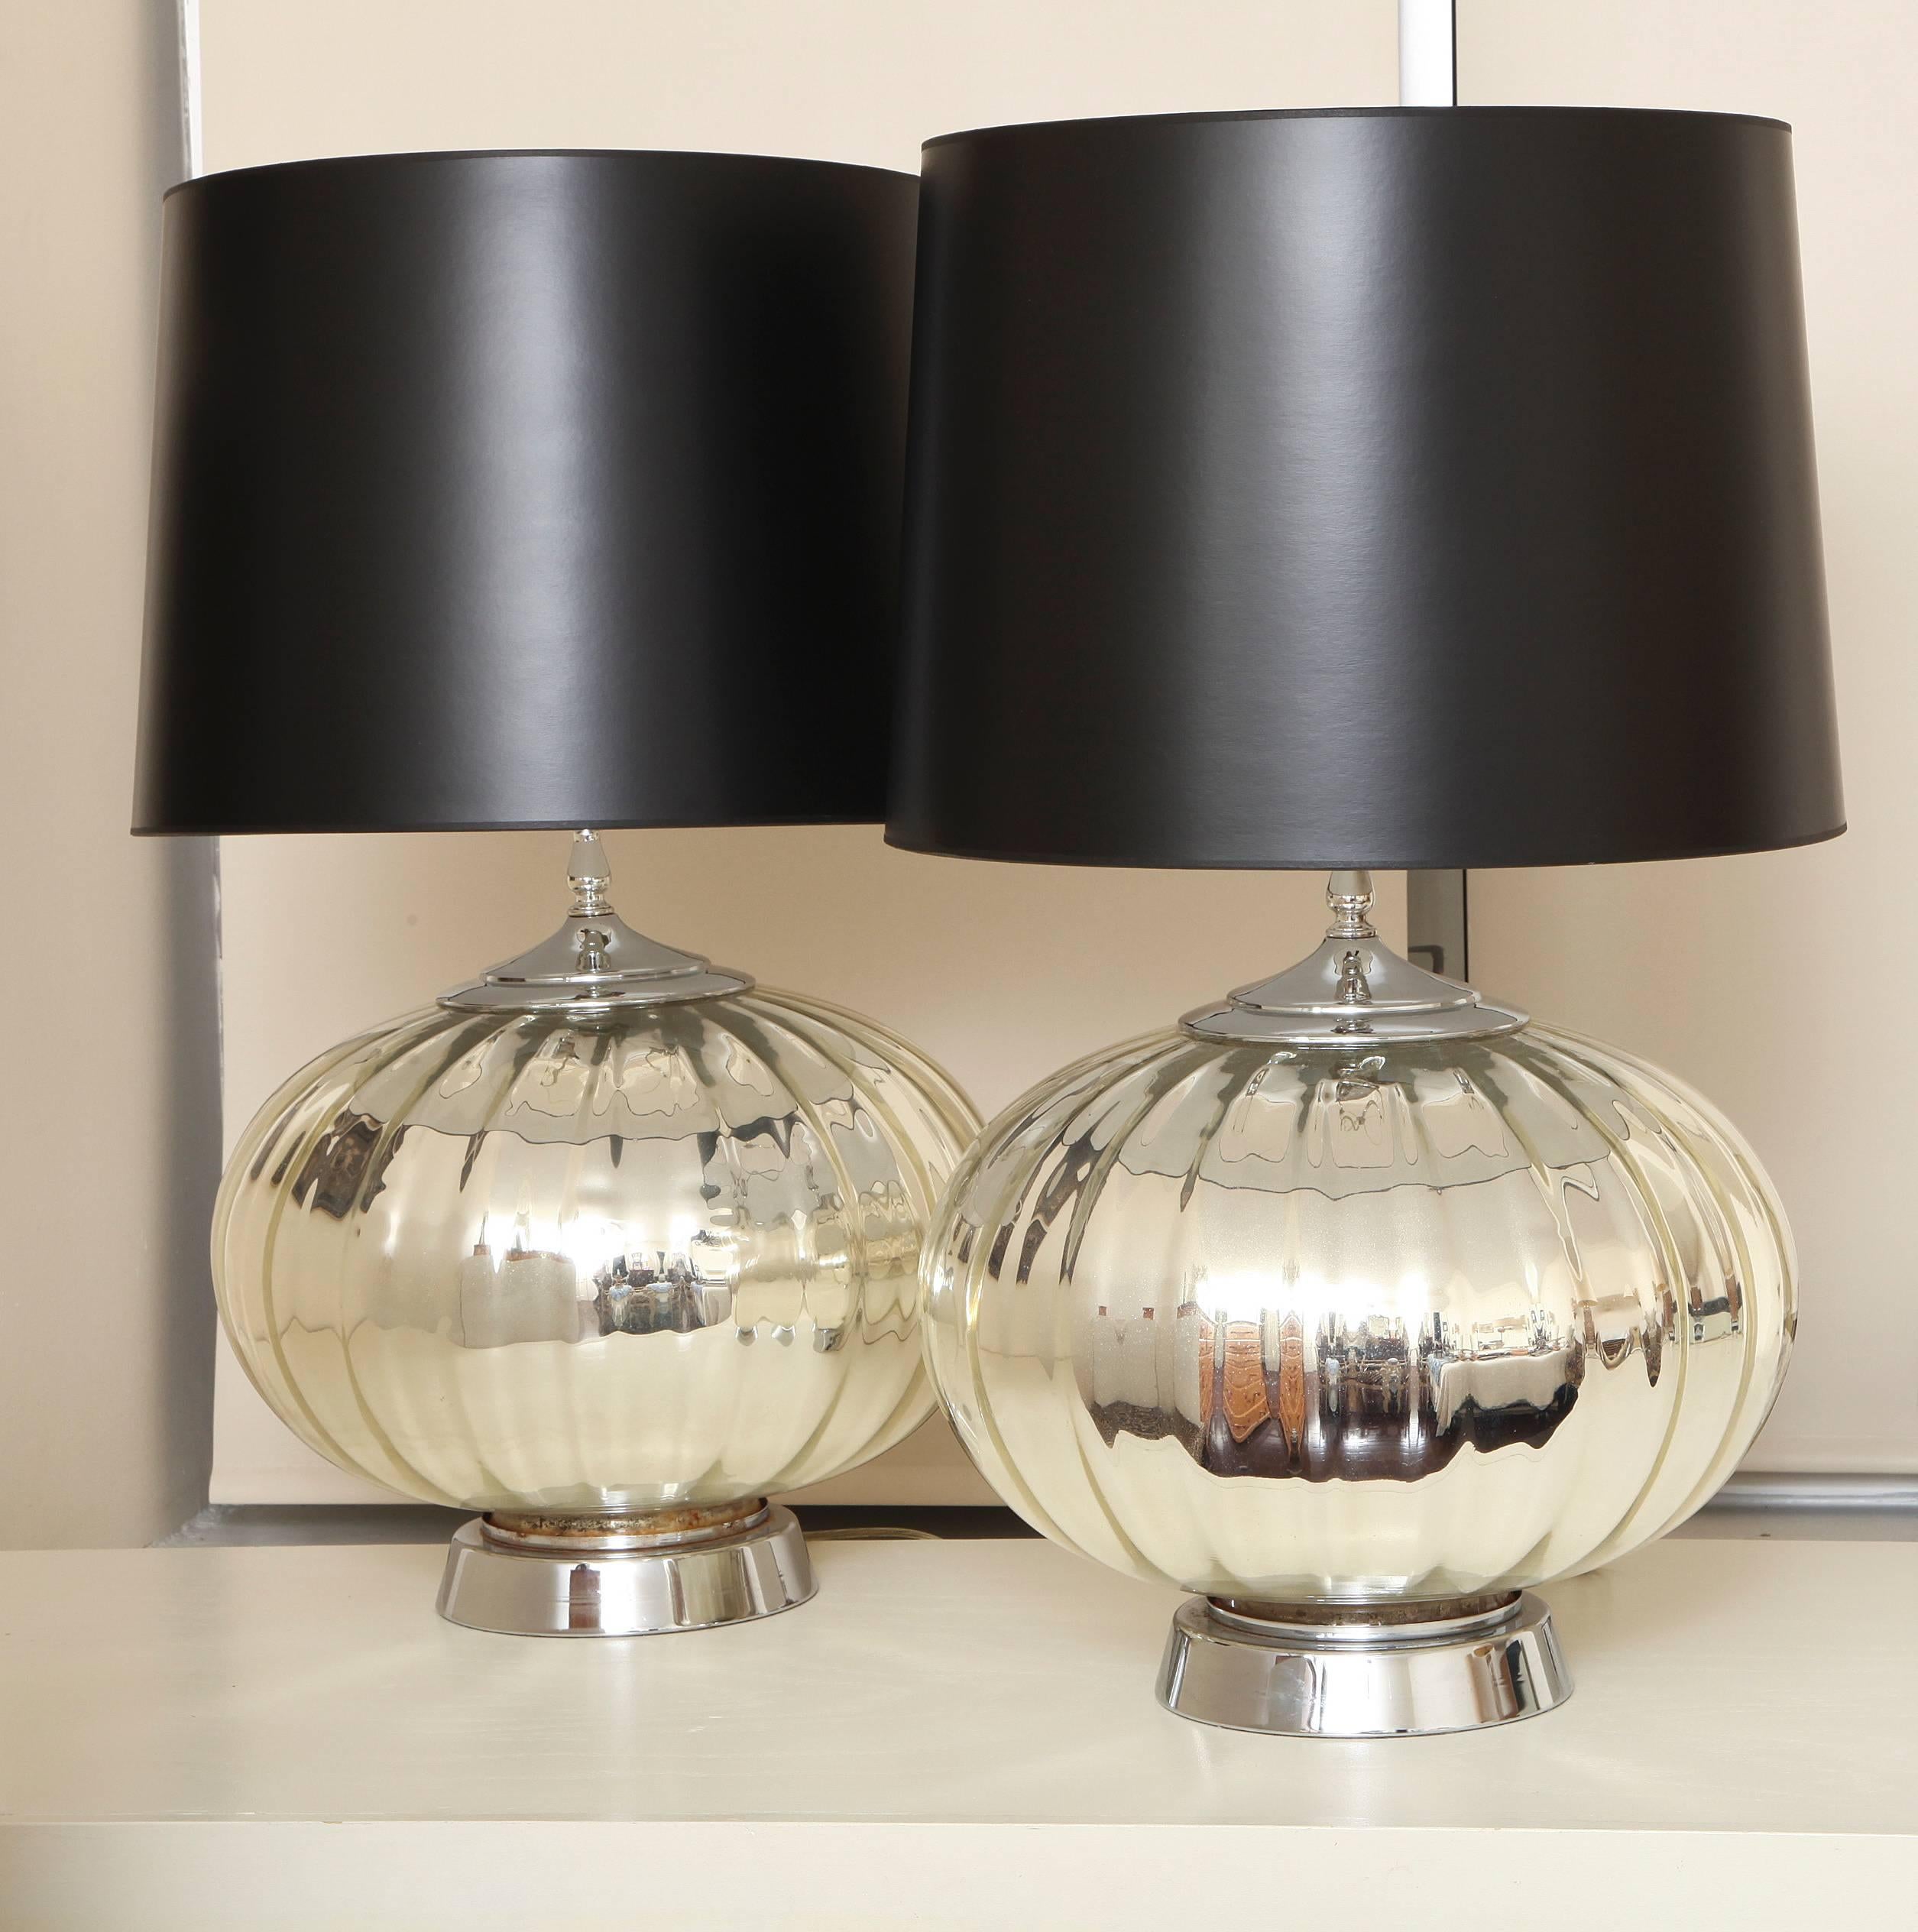 A grand scale pair of midcentury modern ribbed mercury glass table lamps; includes black paper shades if desired.